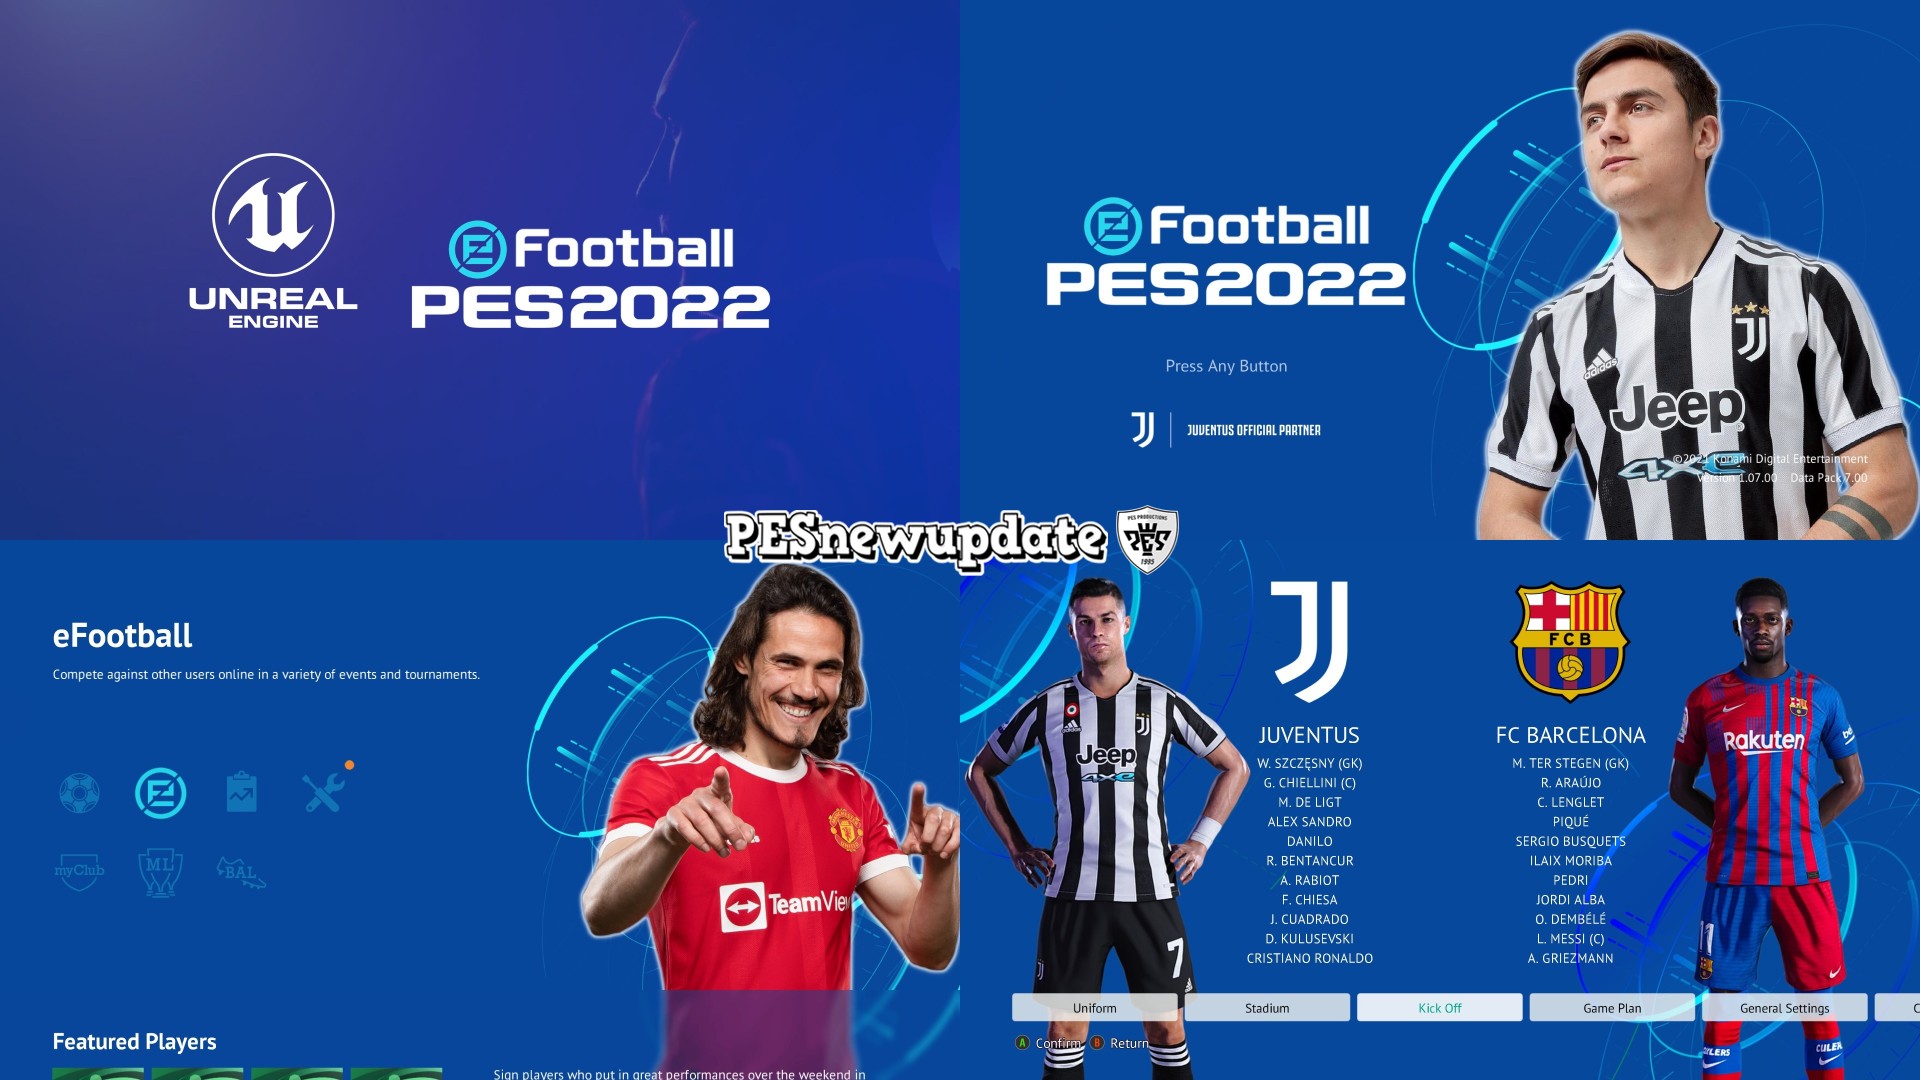 MM Patch - PES 2021 Classic Menu Mod V2 by PES New Update (PES